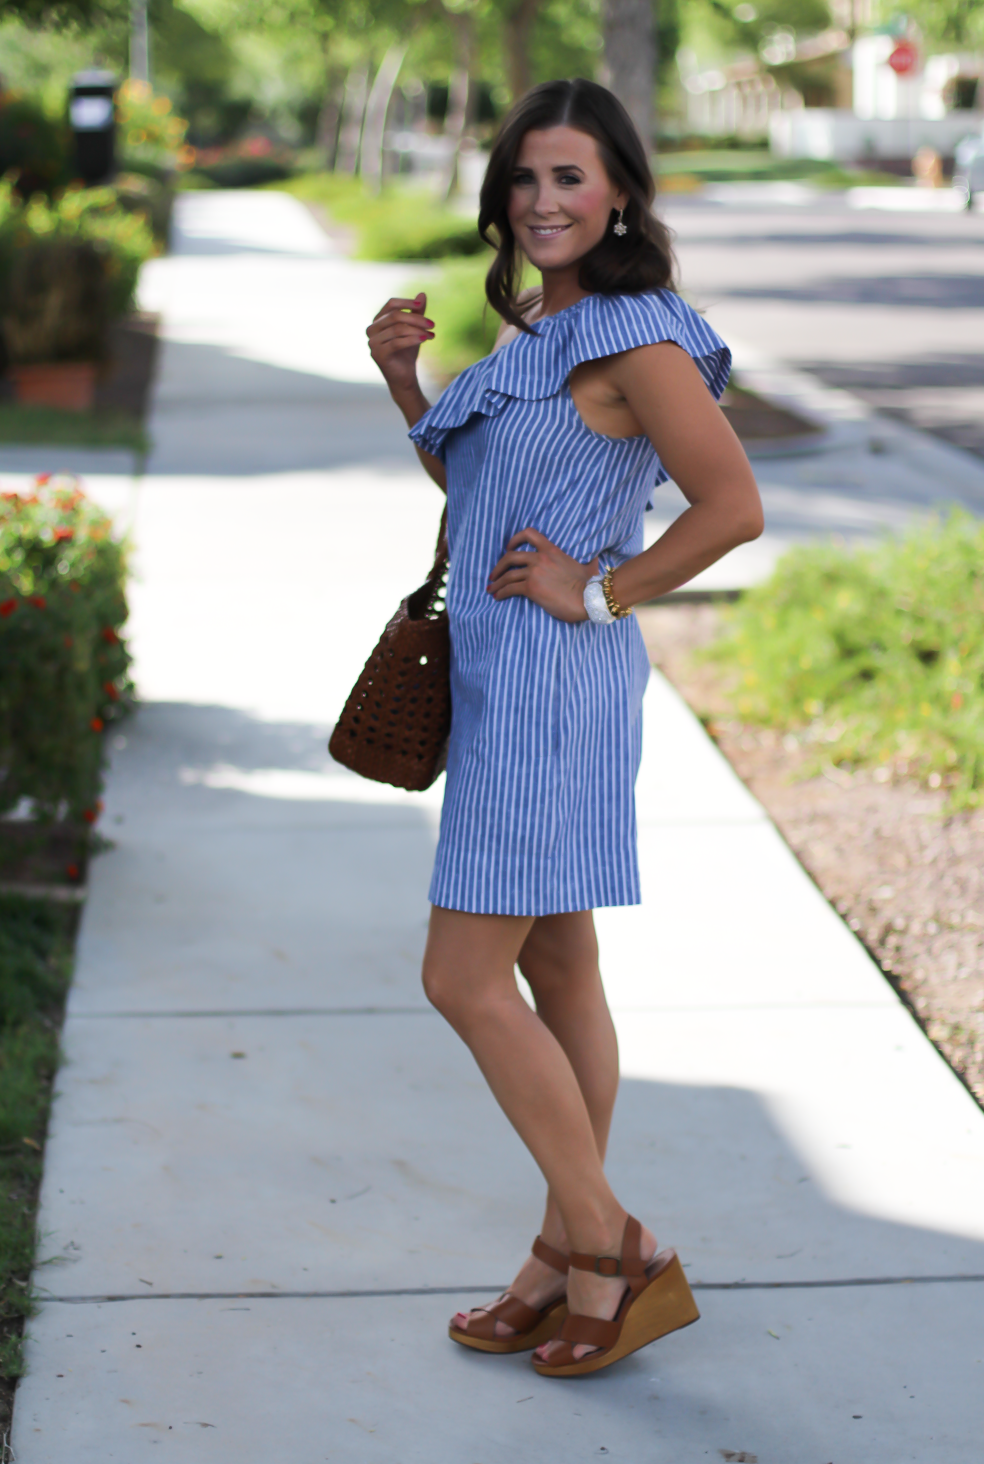 Striped One Shoulder Ruffle Dress, Cognac Leather Wedge Sandals, Leather Basket Tote, Madewell, J.Crew 2